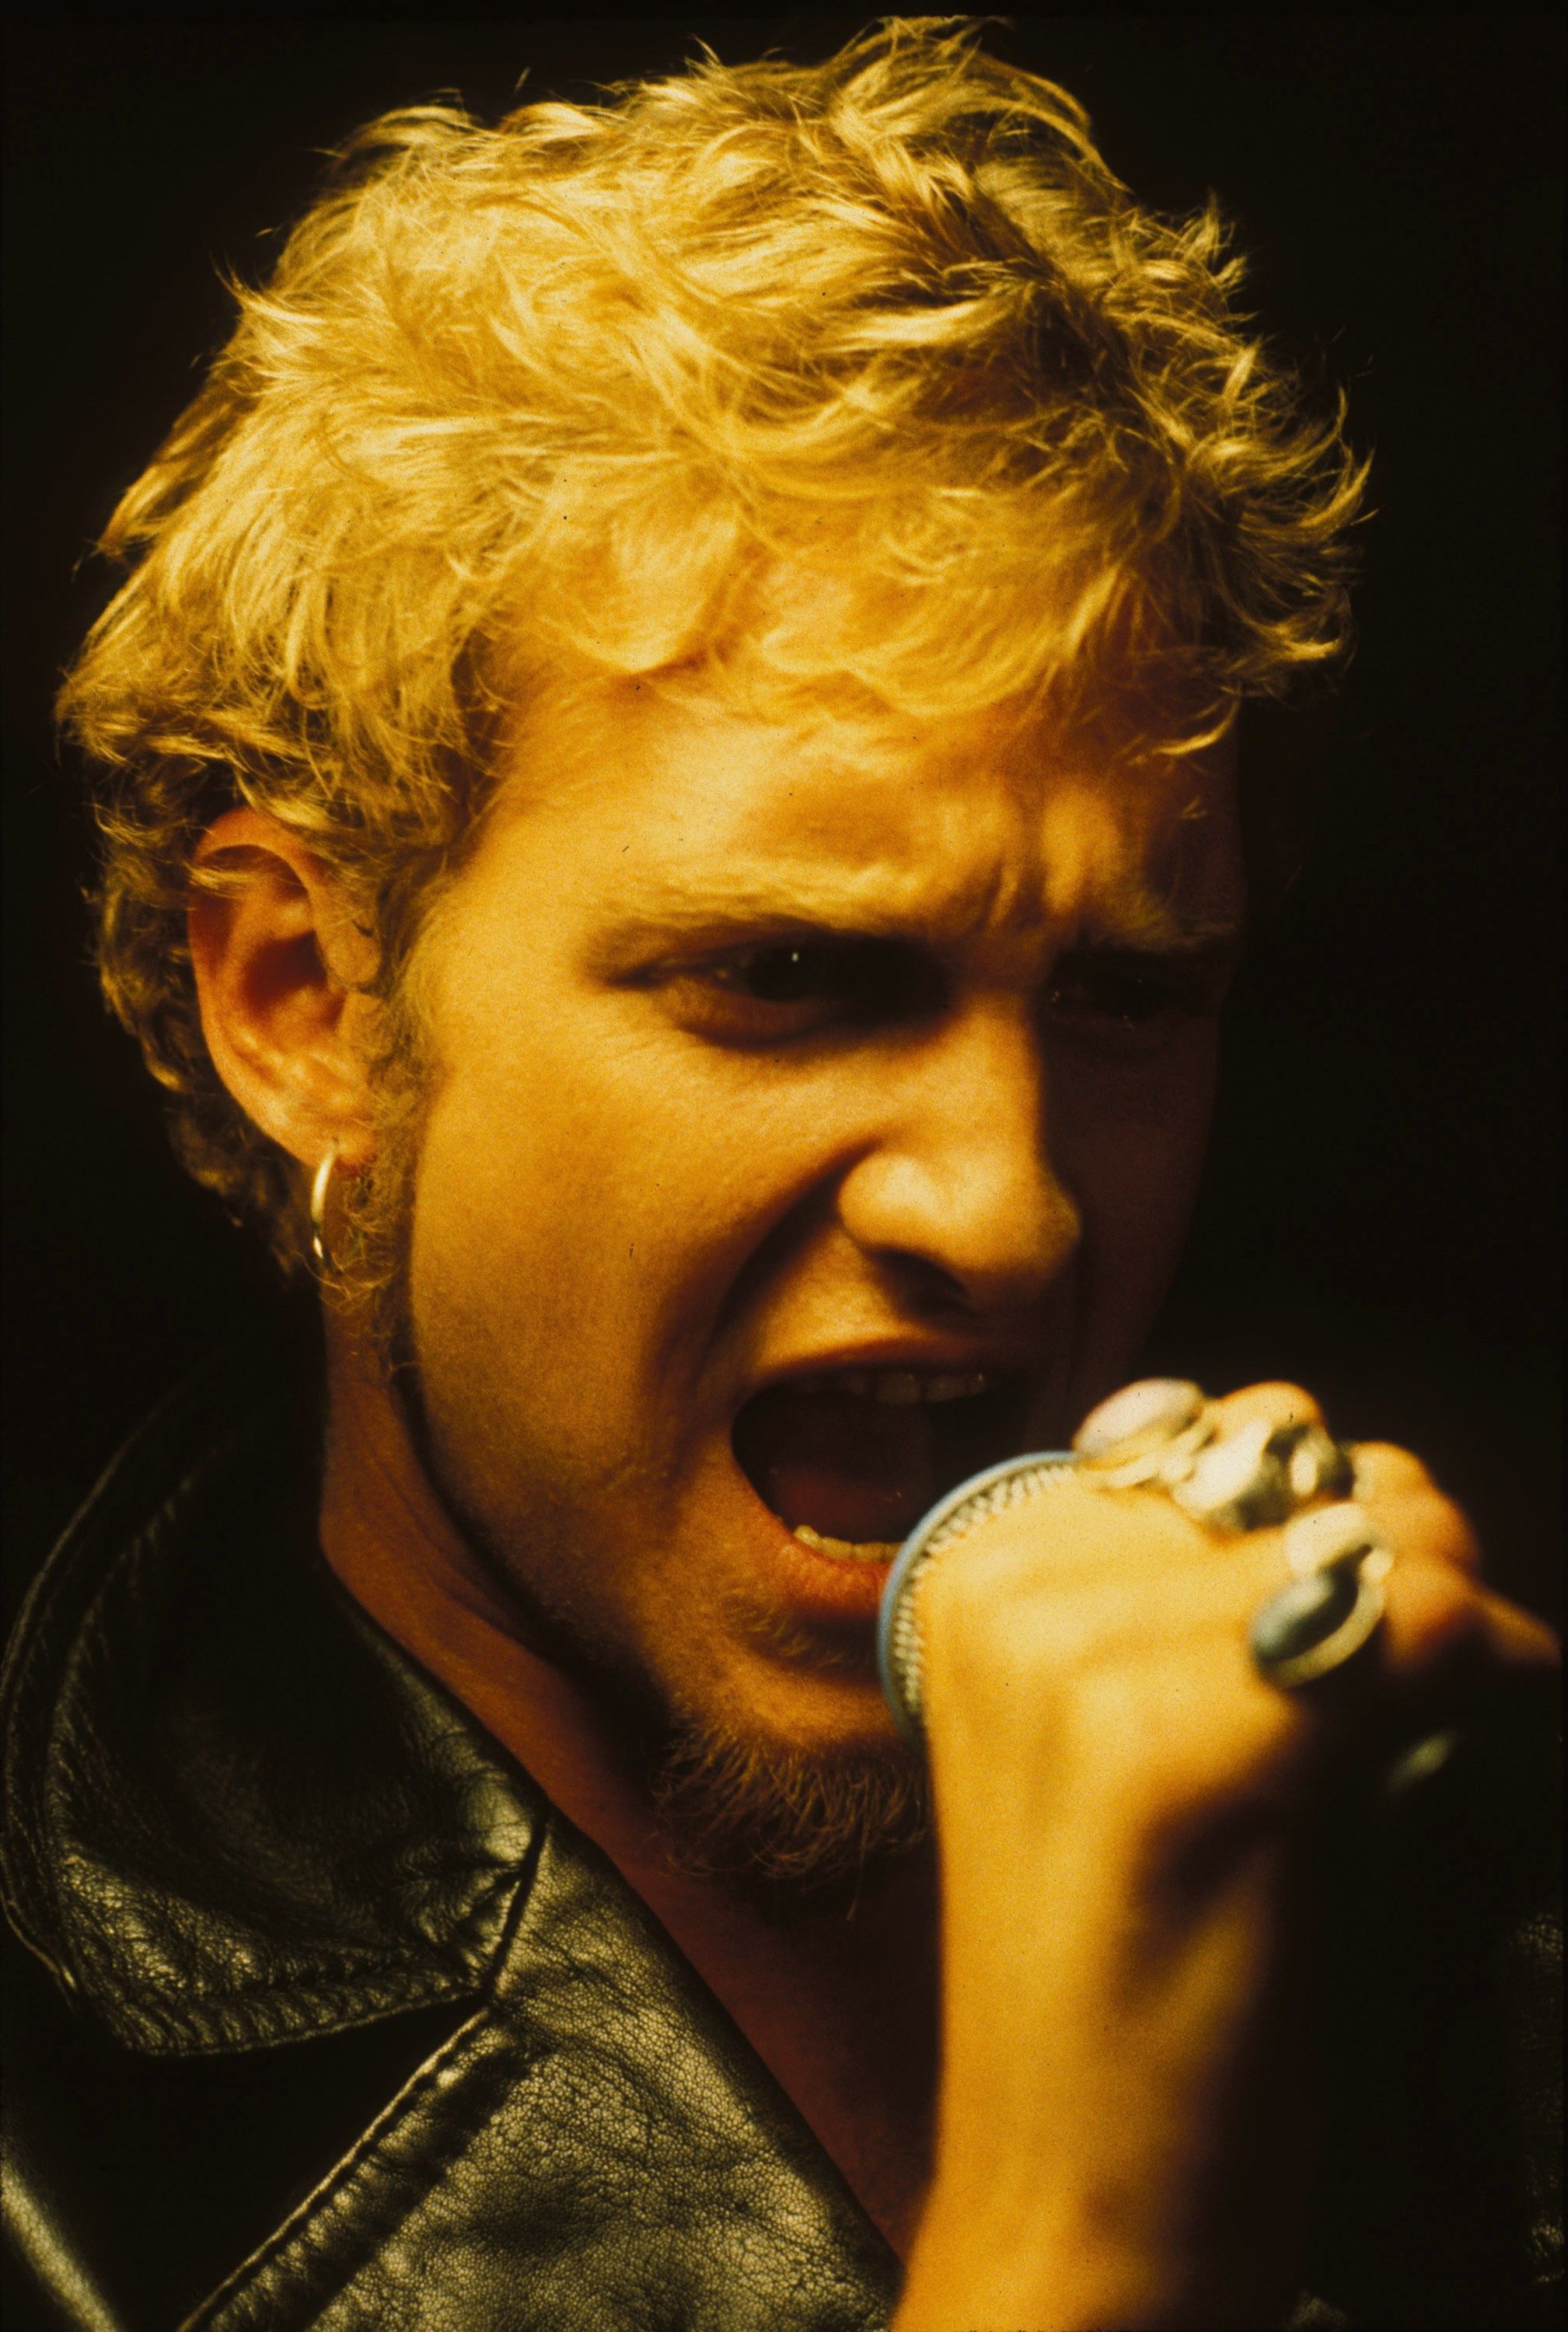 alice in chains. Alice In Chains Wallpaper HD Download. Alice in chains, Layne staley, Staley